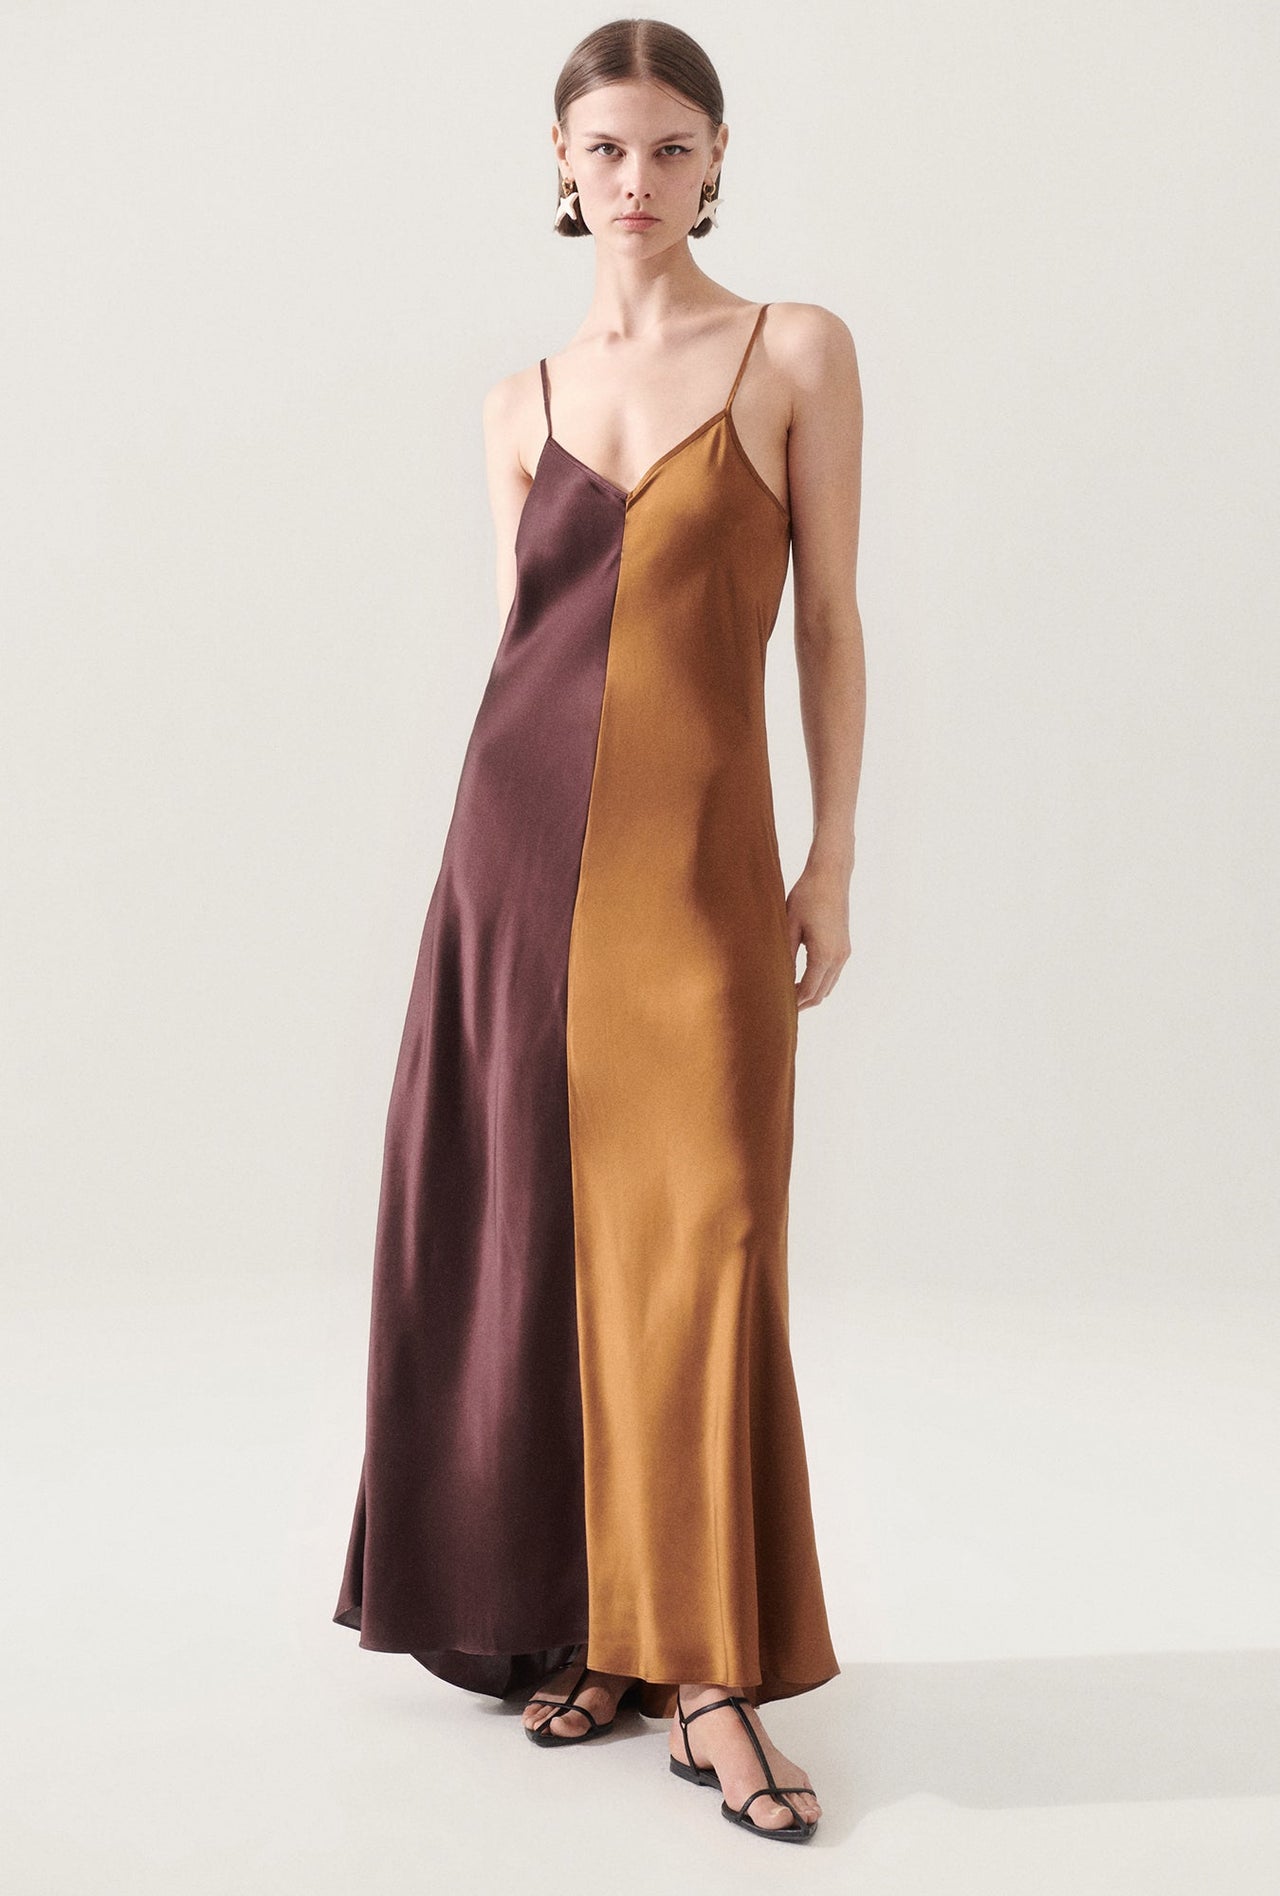 SILK LAUNDRY TWO TONE DRESS - CACAO/VAN DYKE BROWN